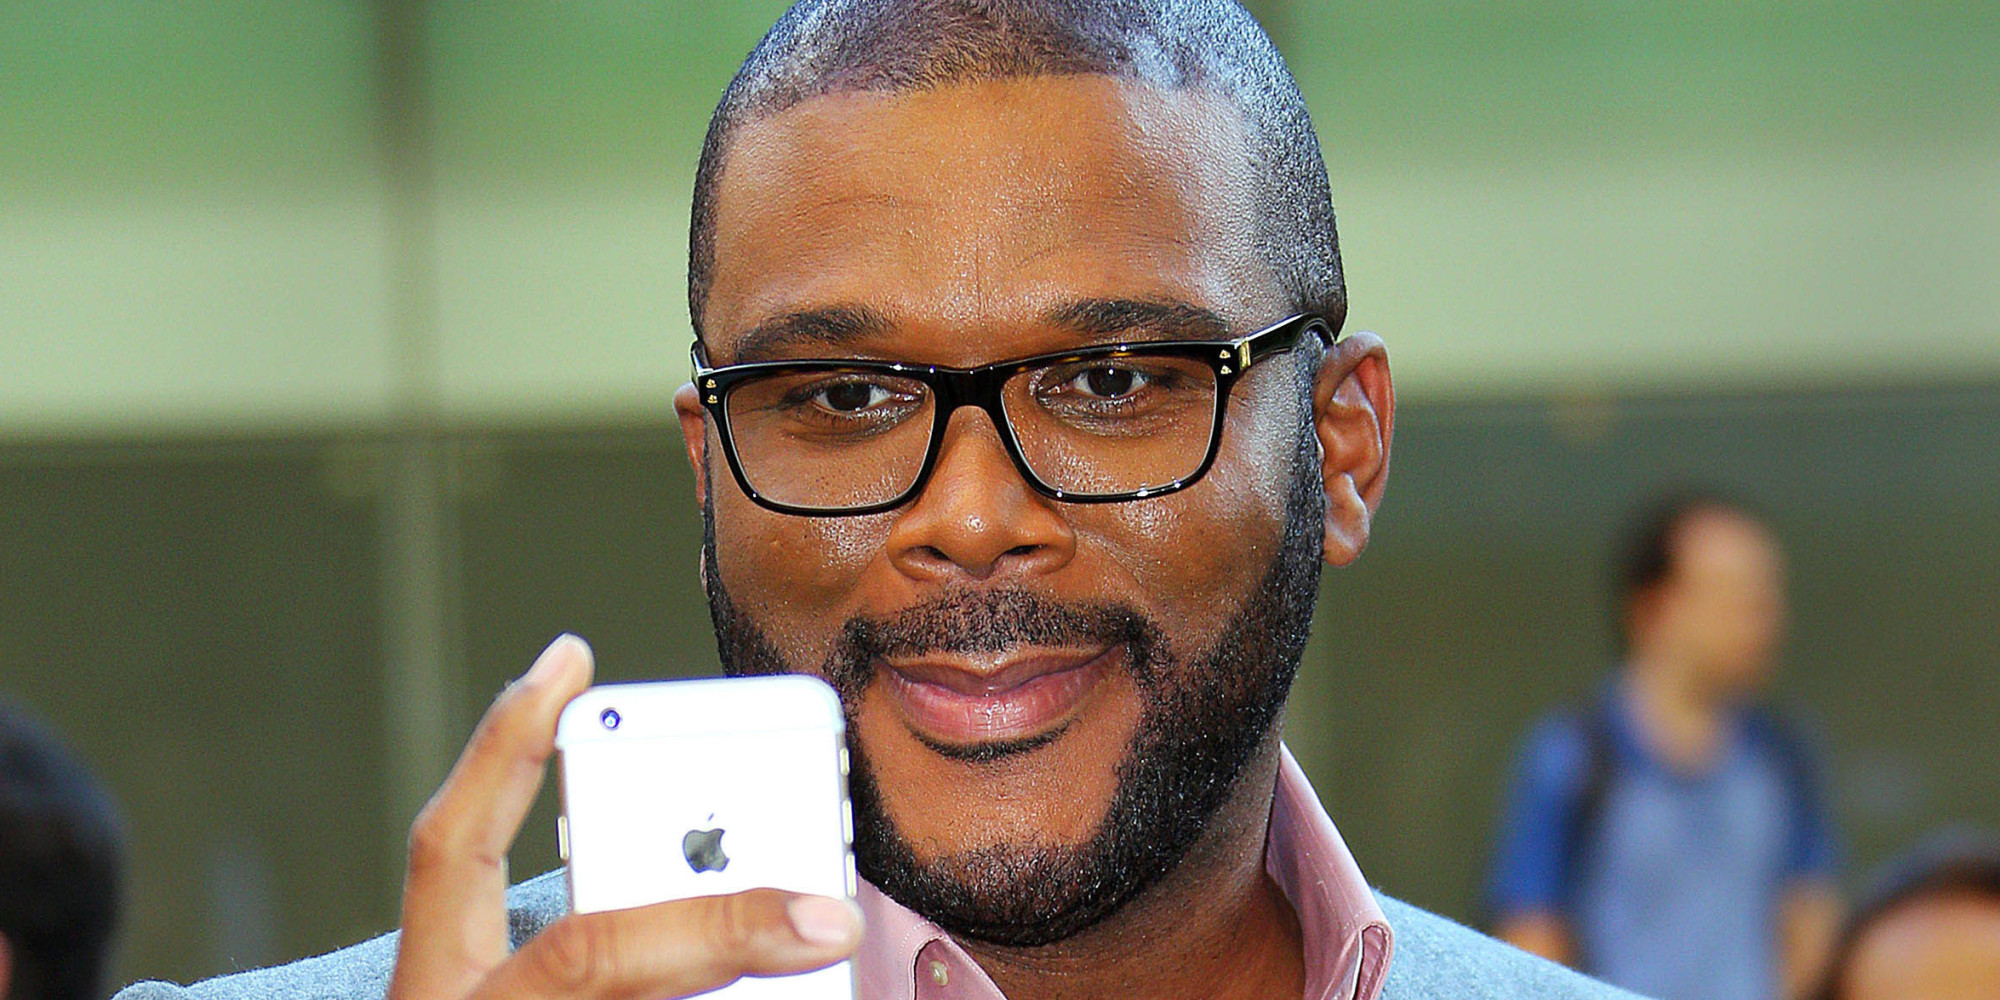 TYLER PERRY TREATED BAD AS A CHILD